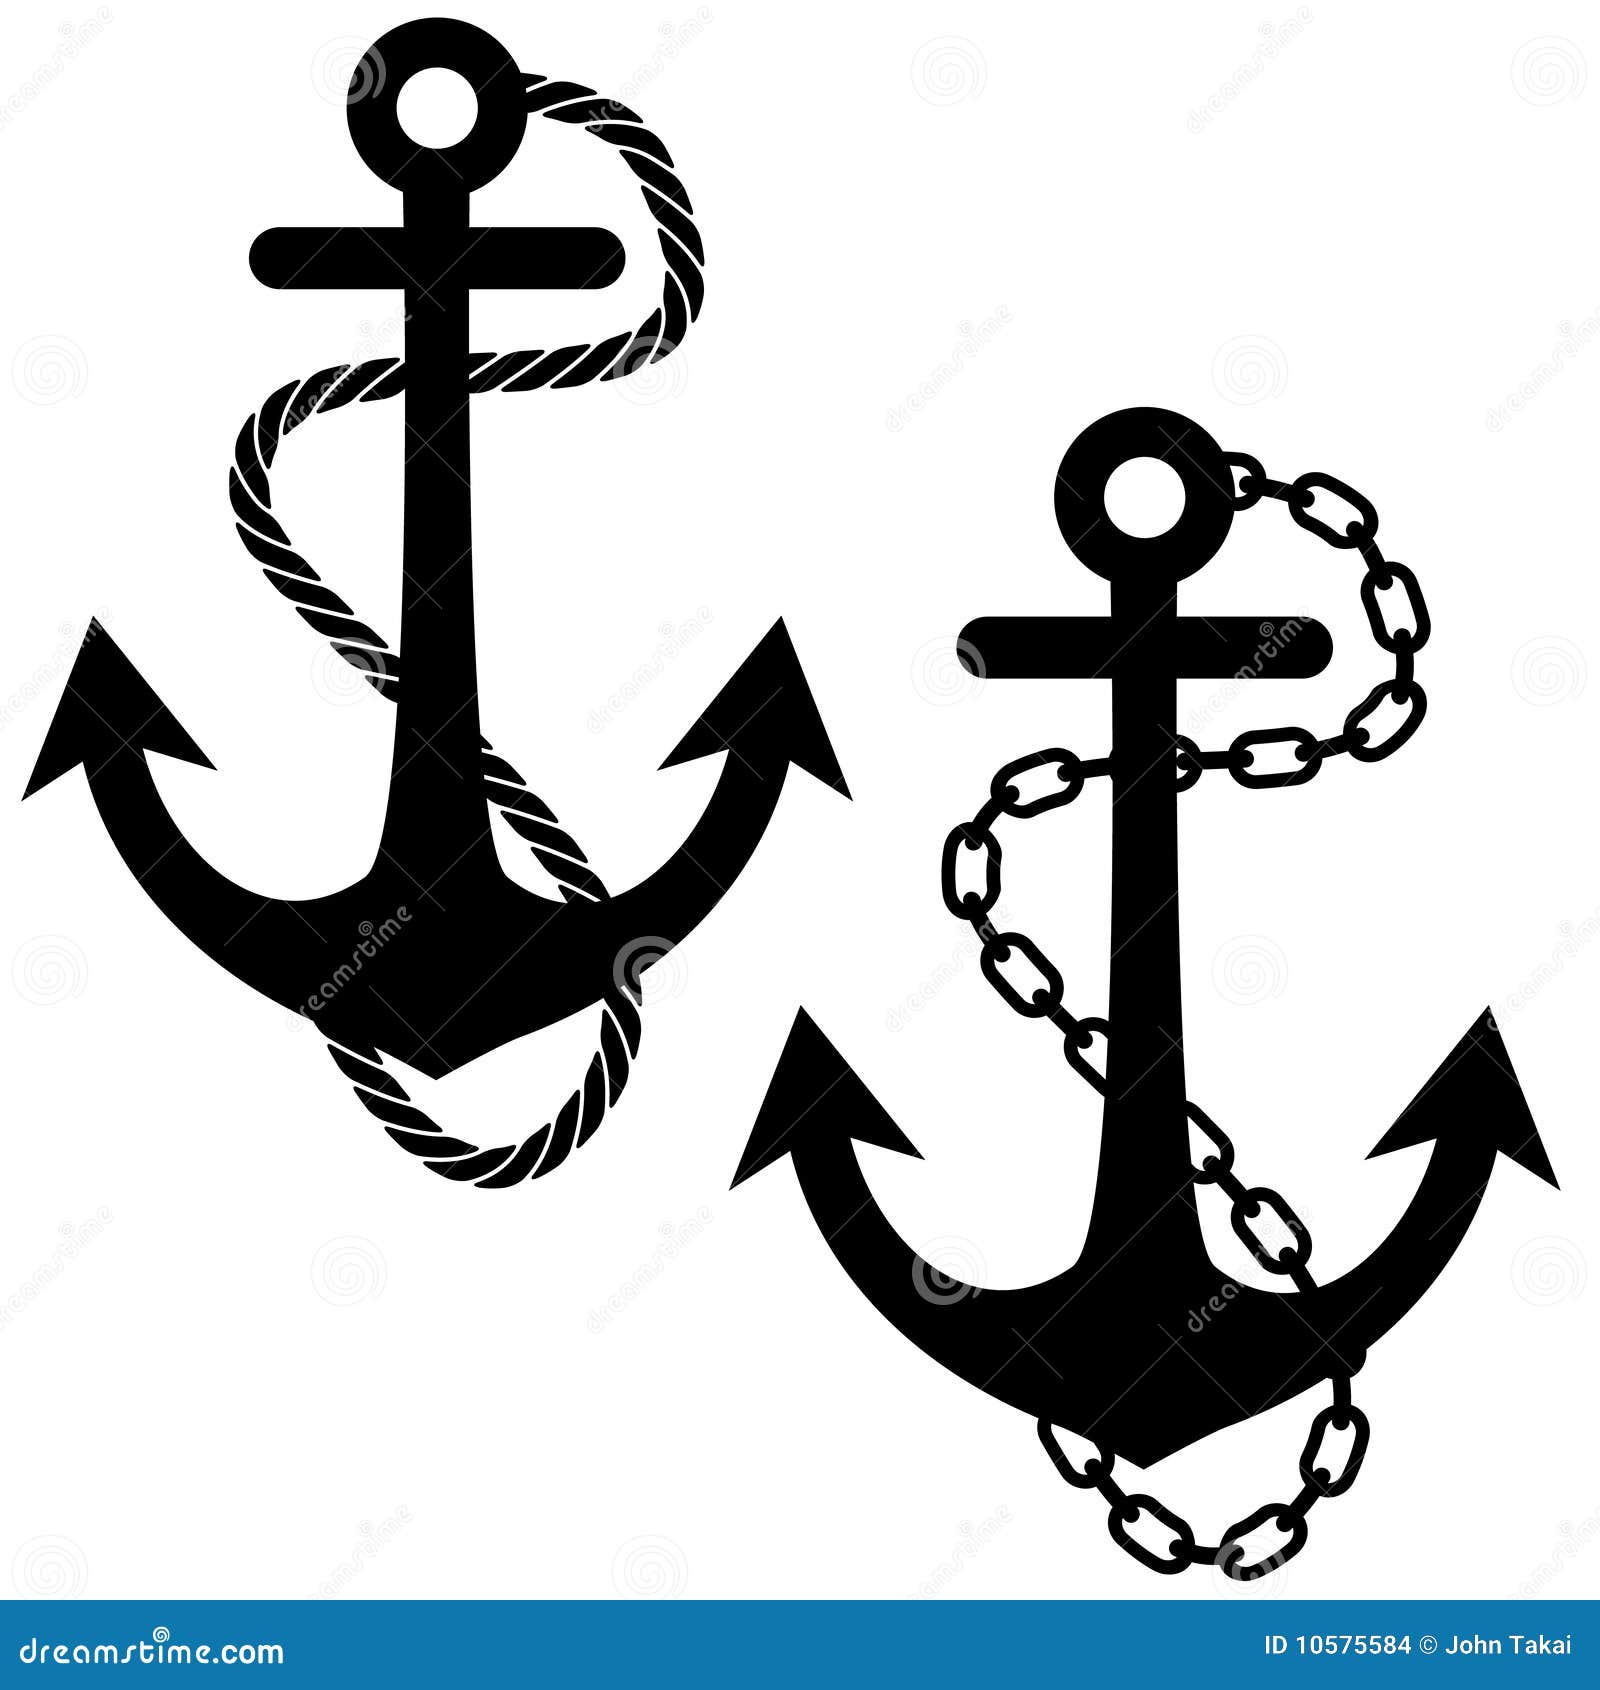 Anchor with Chain and Rope stock vector. Illustration of link - 10575584